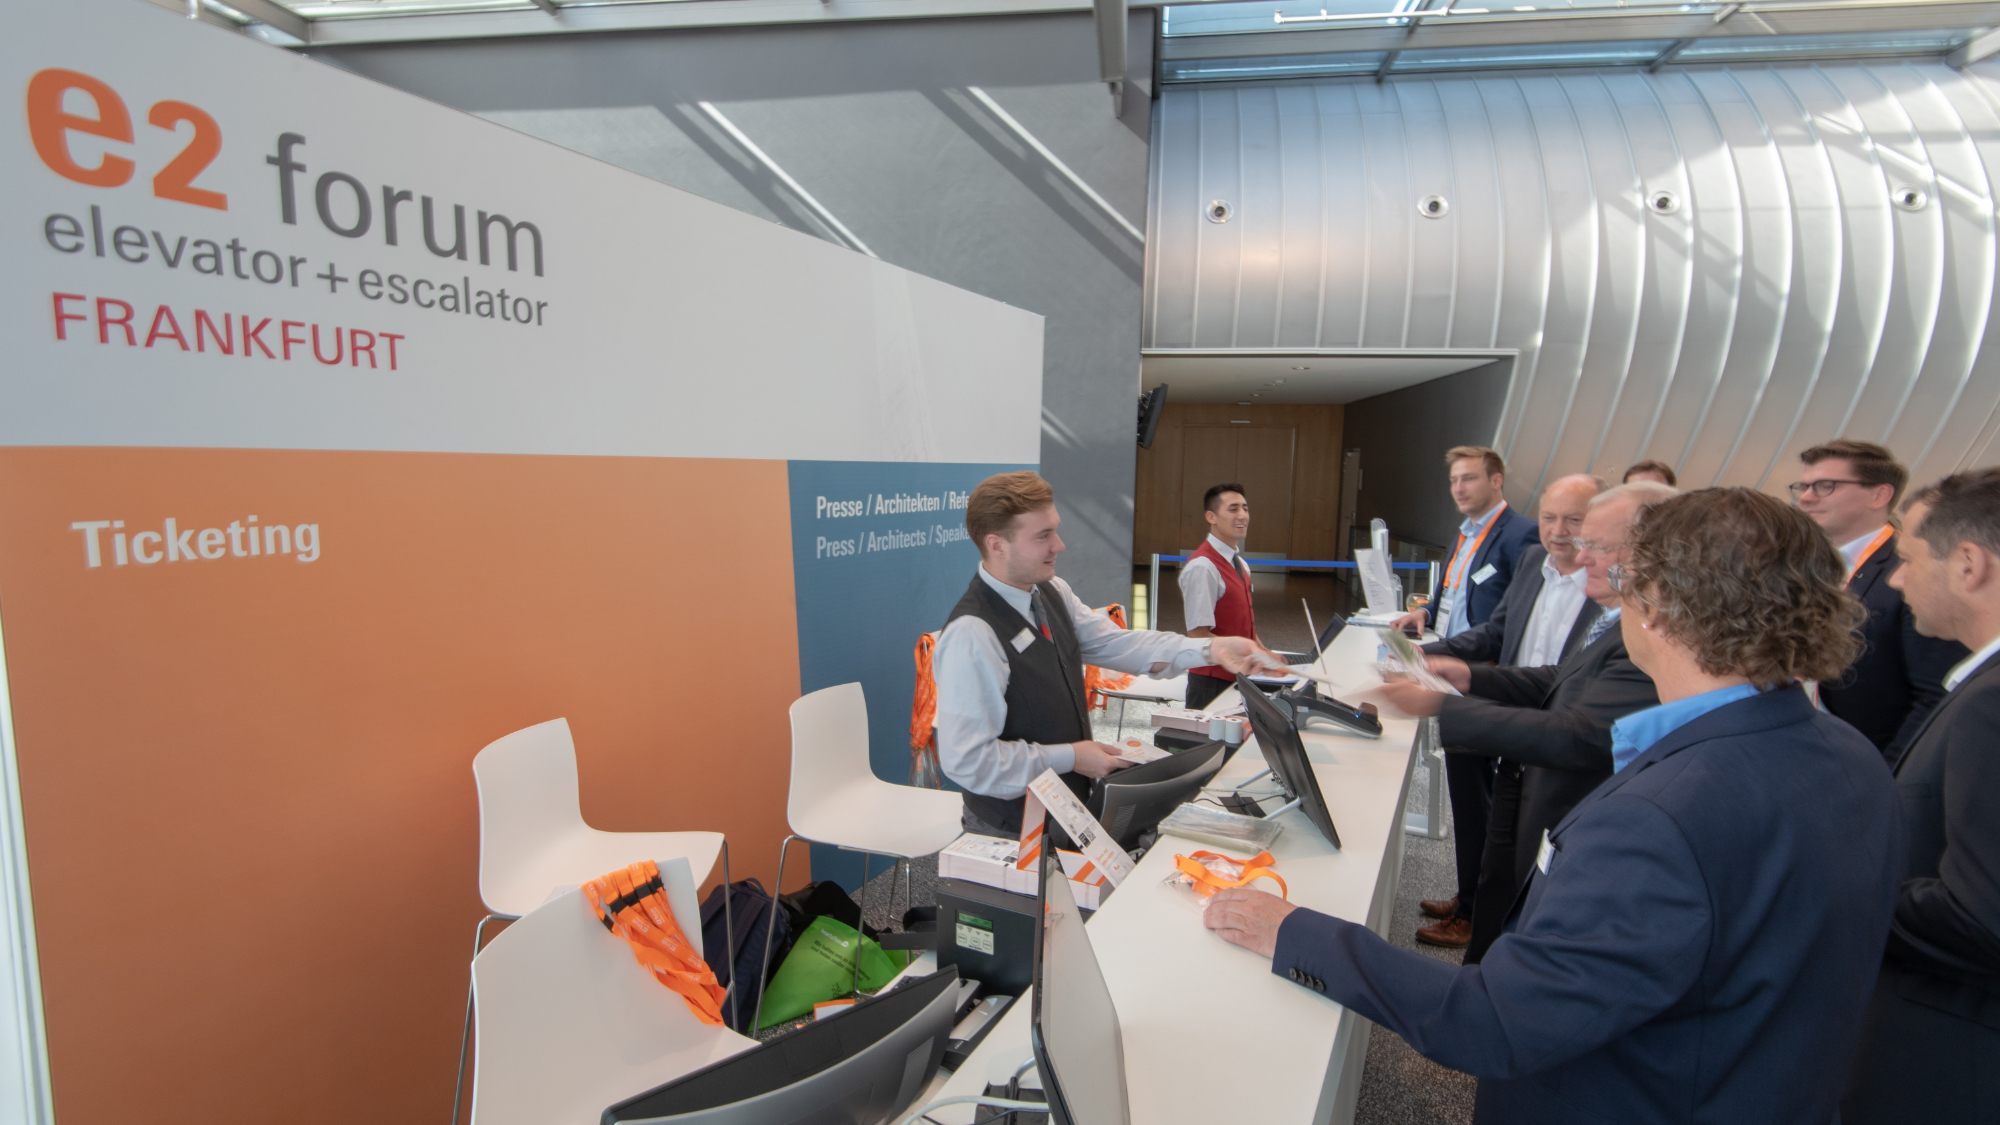 The E2 Forum Frankfurt will take place on 21 and 22 September 2022: the innovation forum for escalator and escalator technology – a place for dialogue between system operators, building managers and the industry.